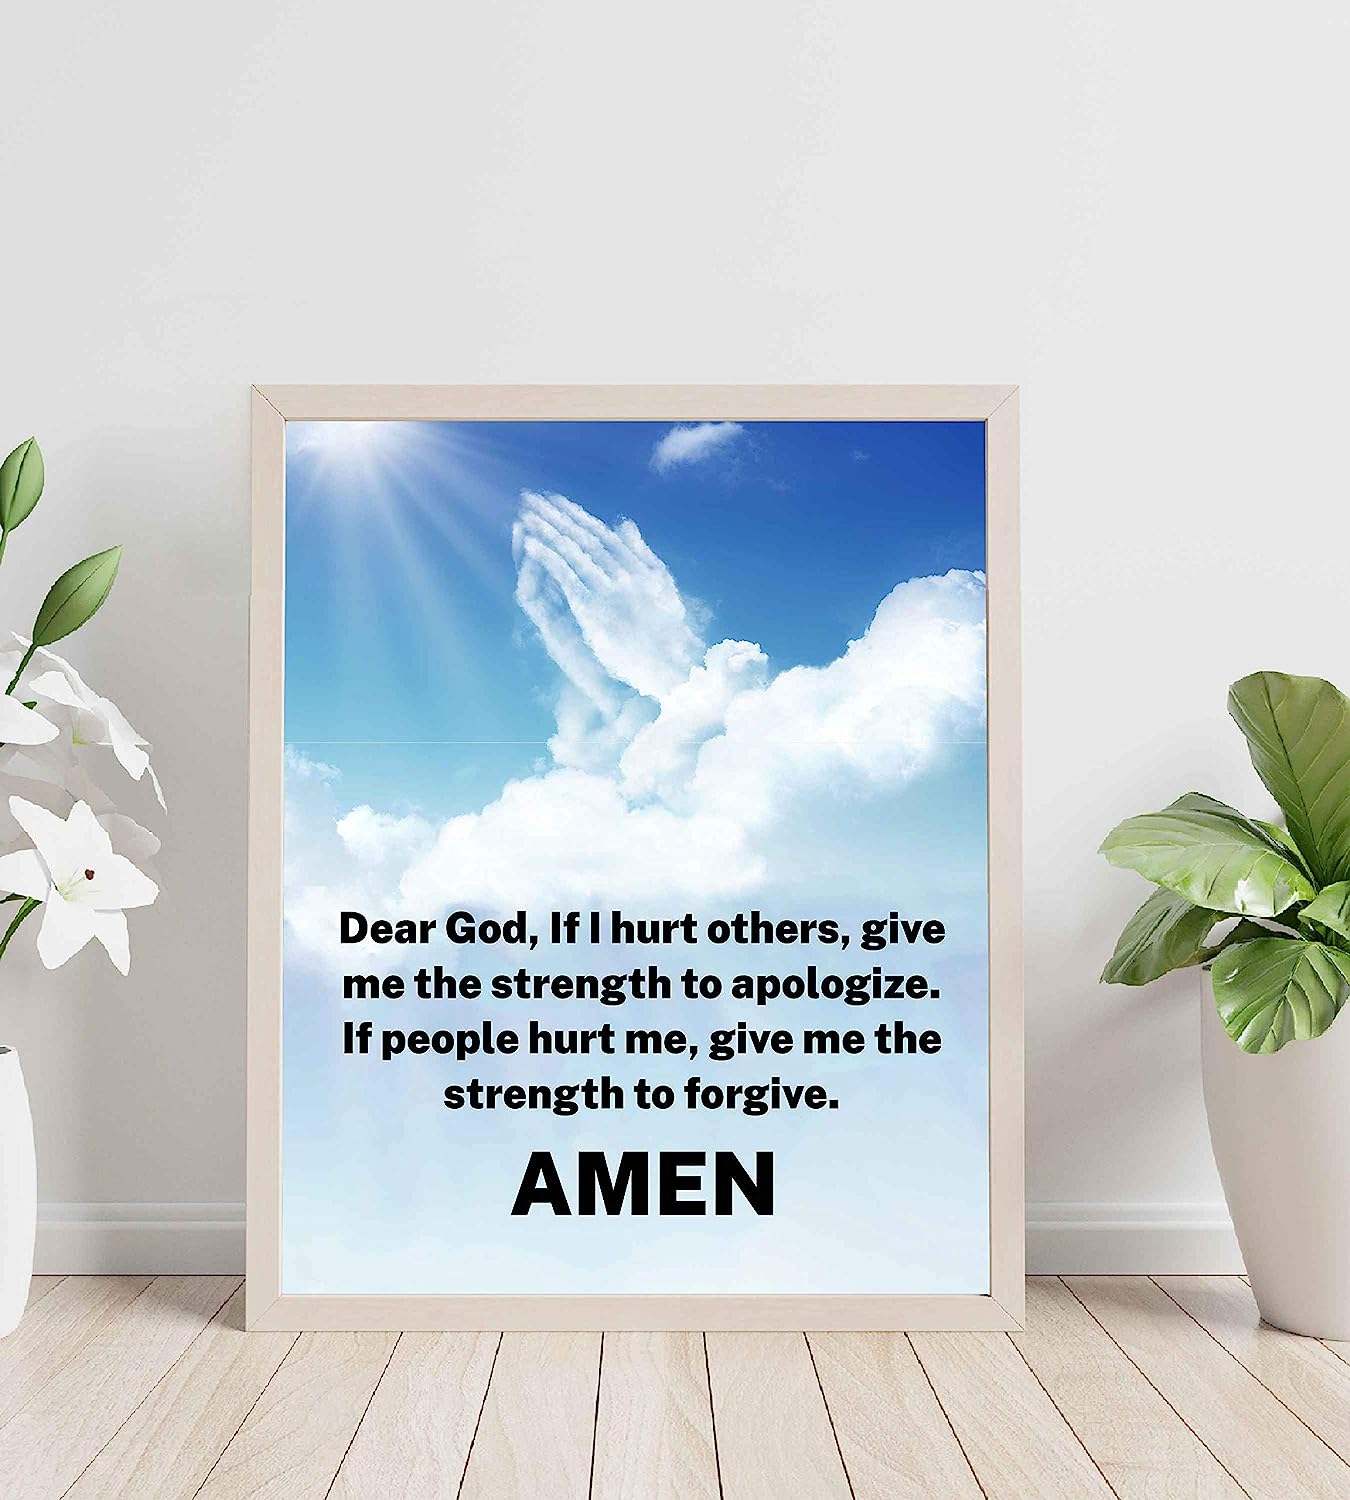 Give Me the Strength to Apologize-Forgive-Christian Prayer Wall Art -8 x 10" Typographic Poster Print-Ready to Frame. Inspirational Home-Office-Church Decor. Great Gift of Faith and Forgiveness!